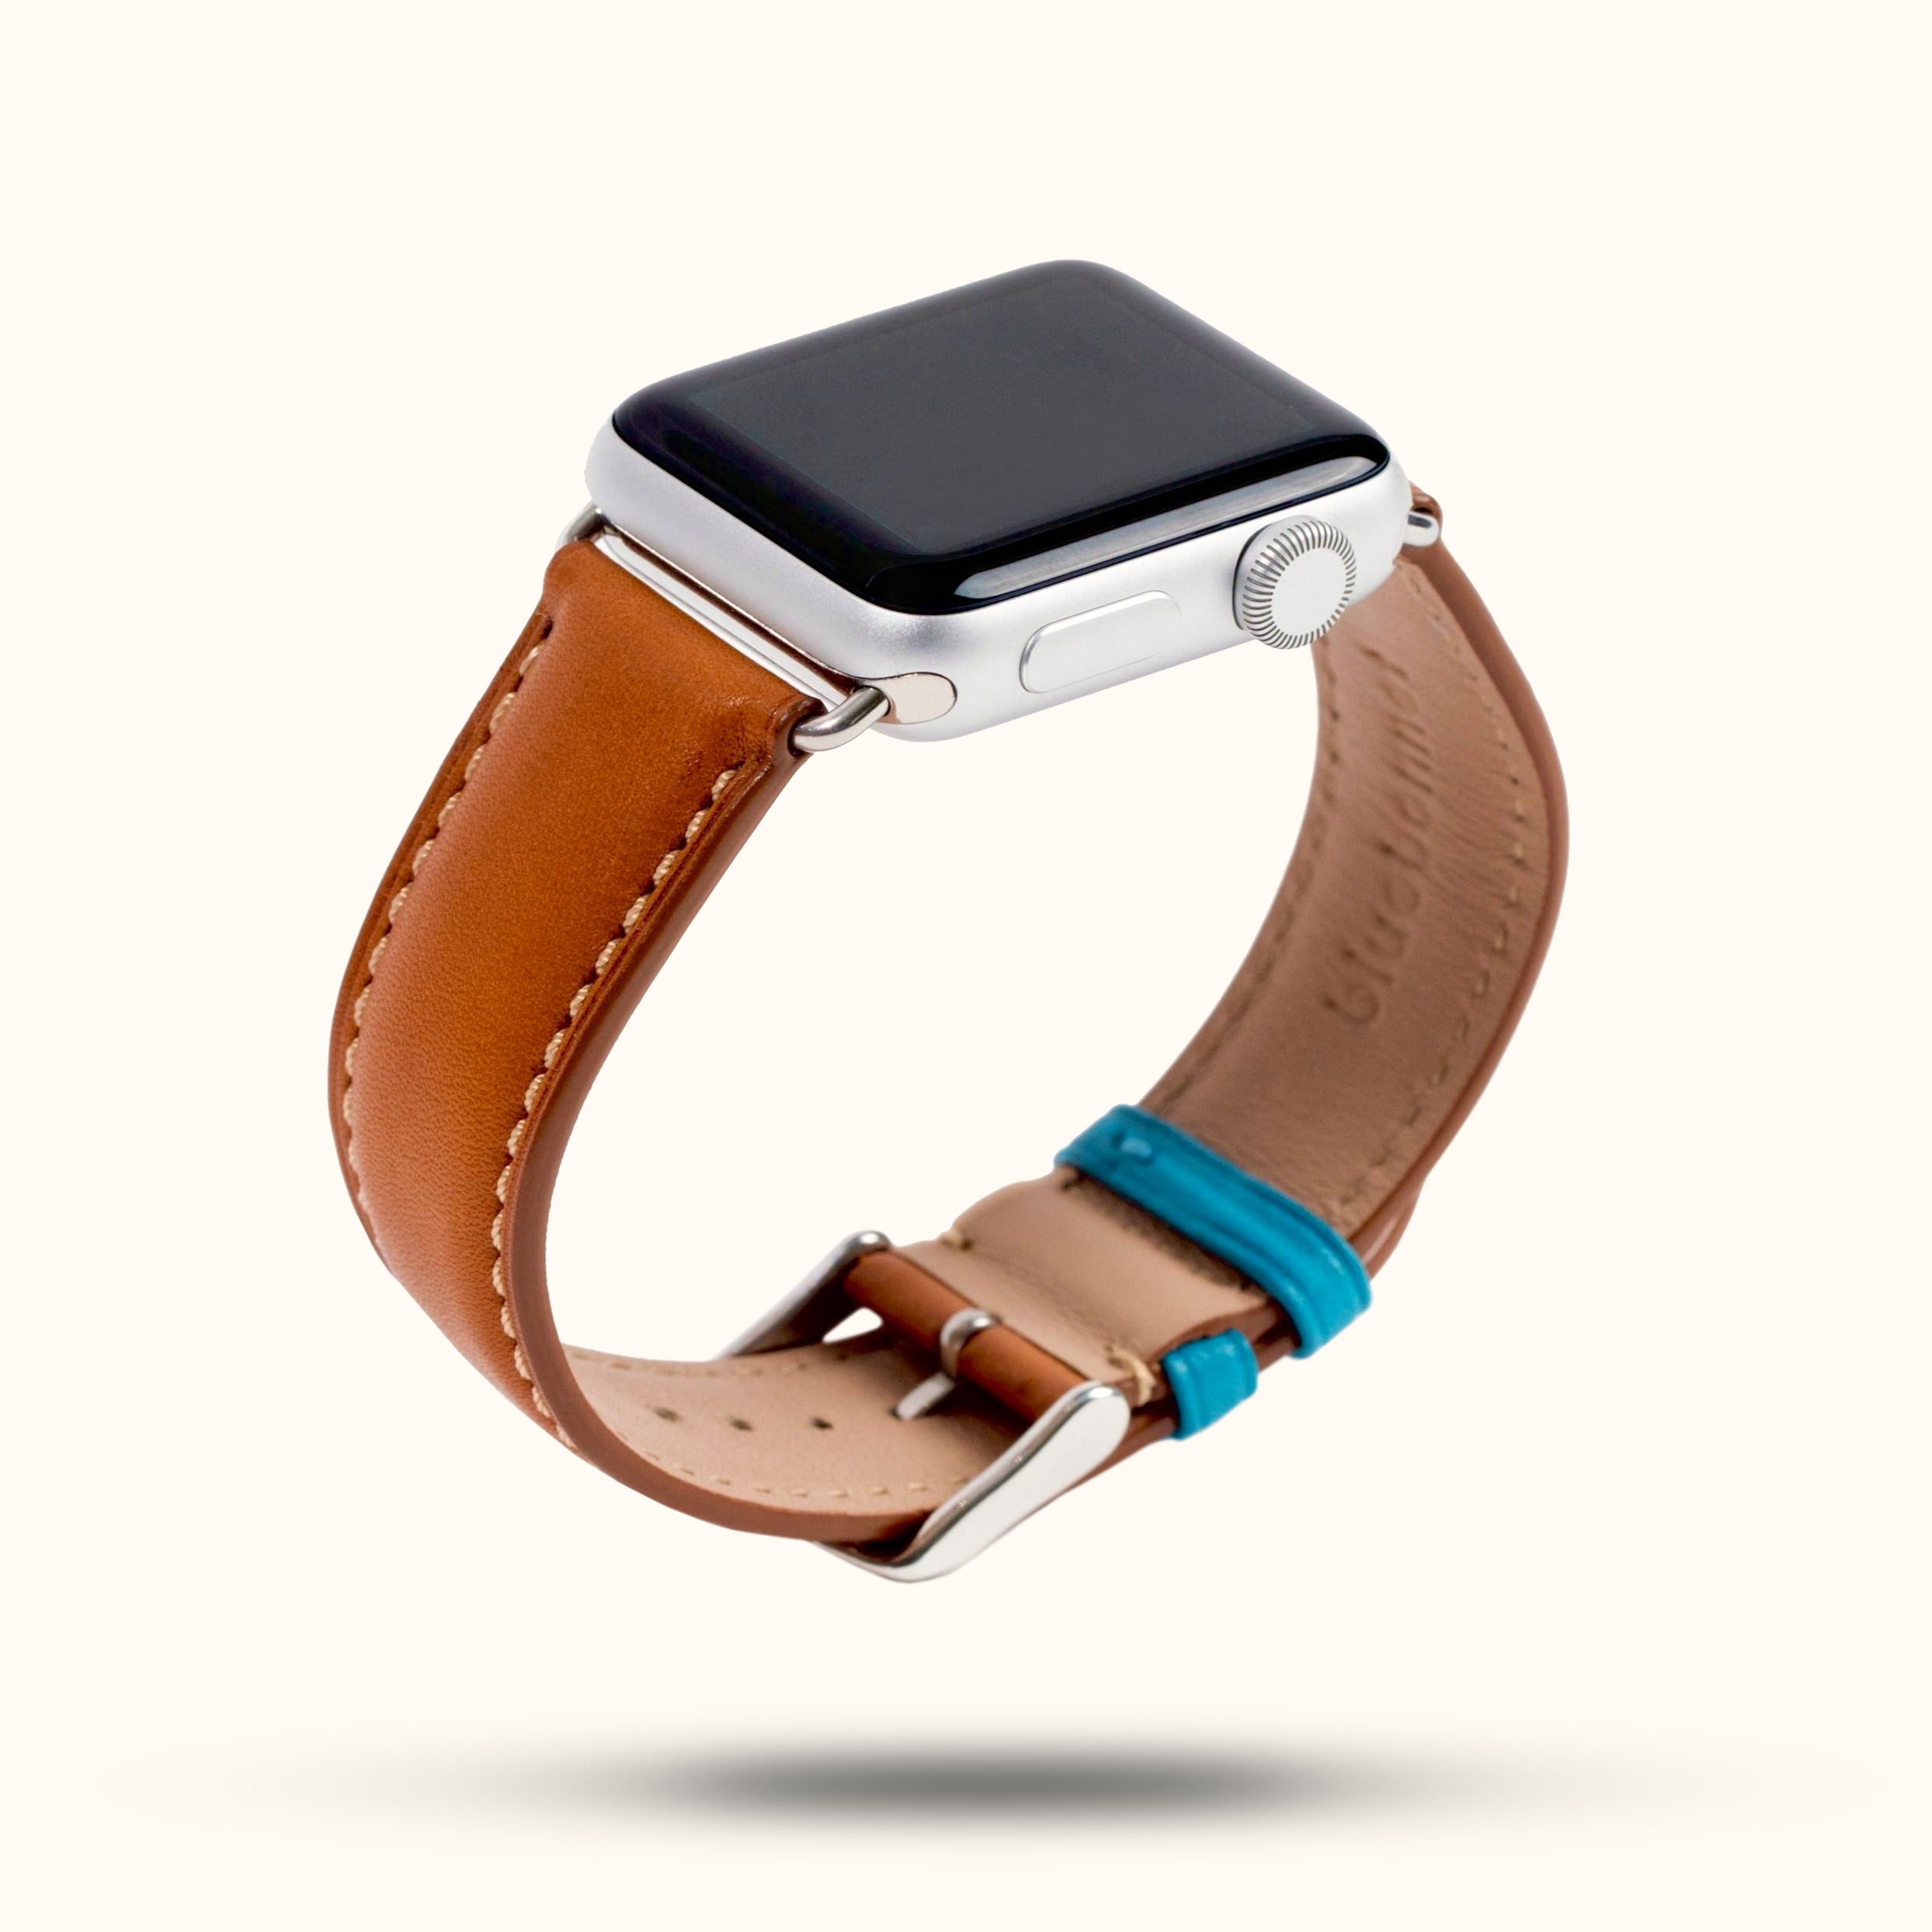 New Spigen Enzo Apple Series 9 leather band hits at $27